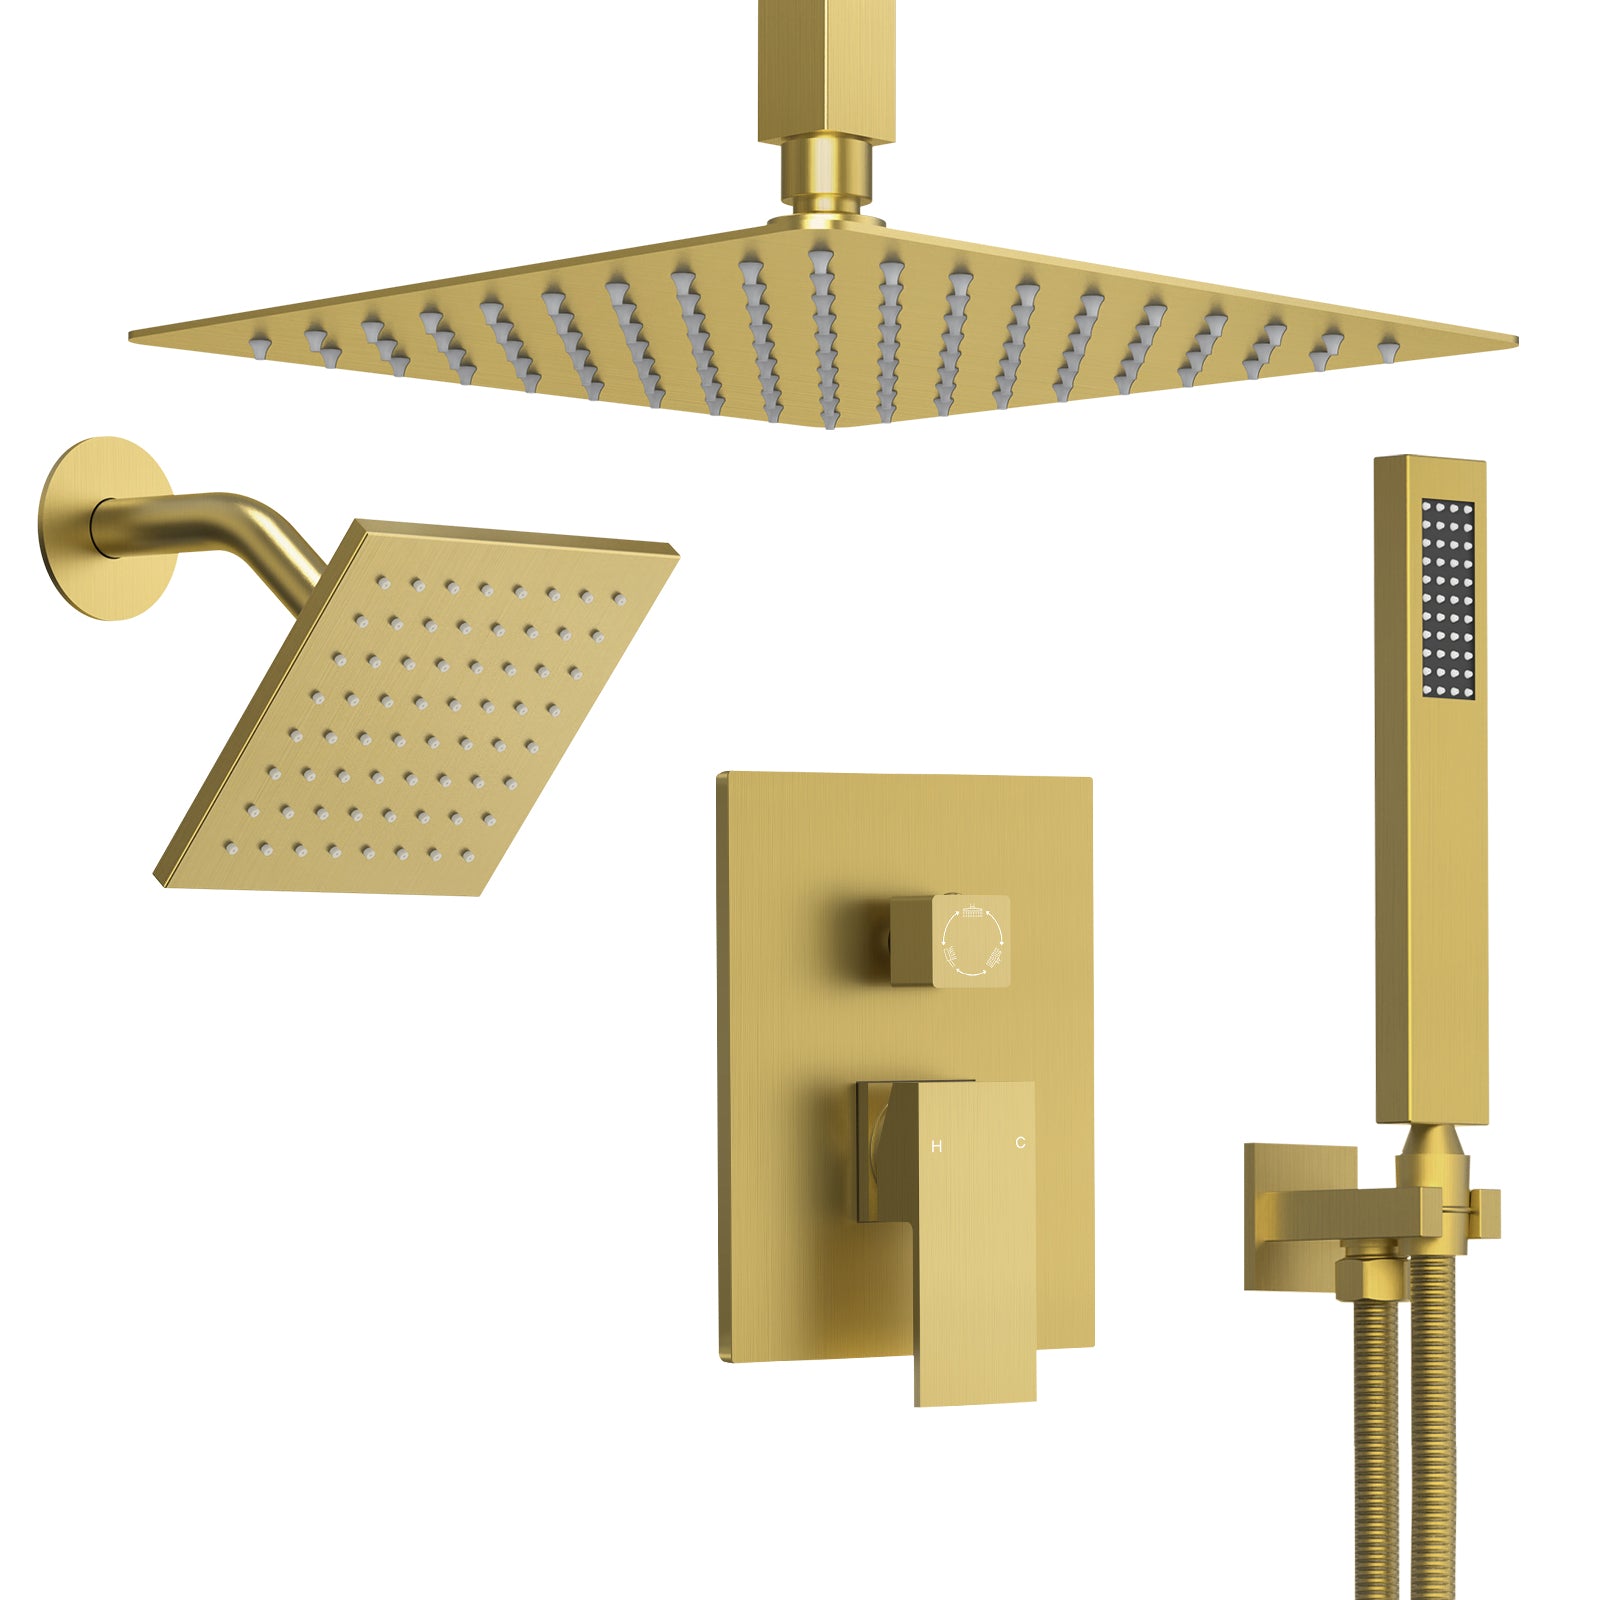 EVERSTEIN Shower System with Dual Heads | 10" Ceiling Rainfall | High-Pressure Bathroom Gold Faucet Set with Handheld Spray